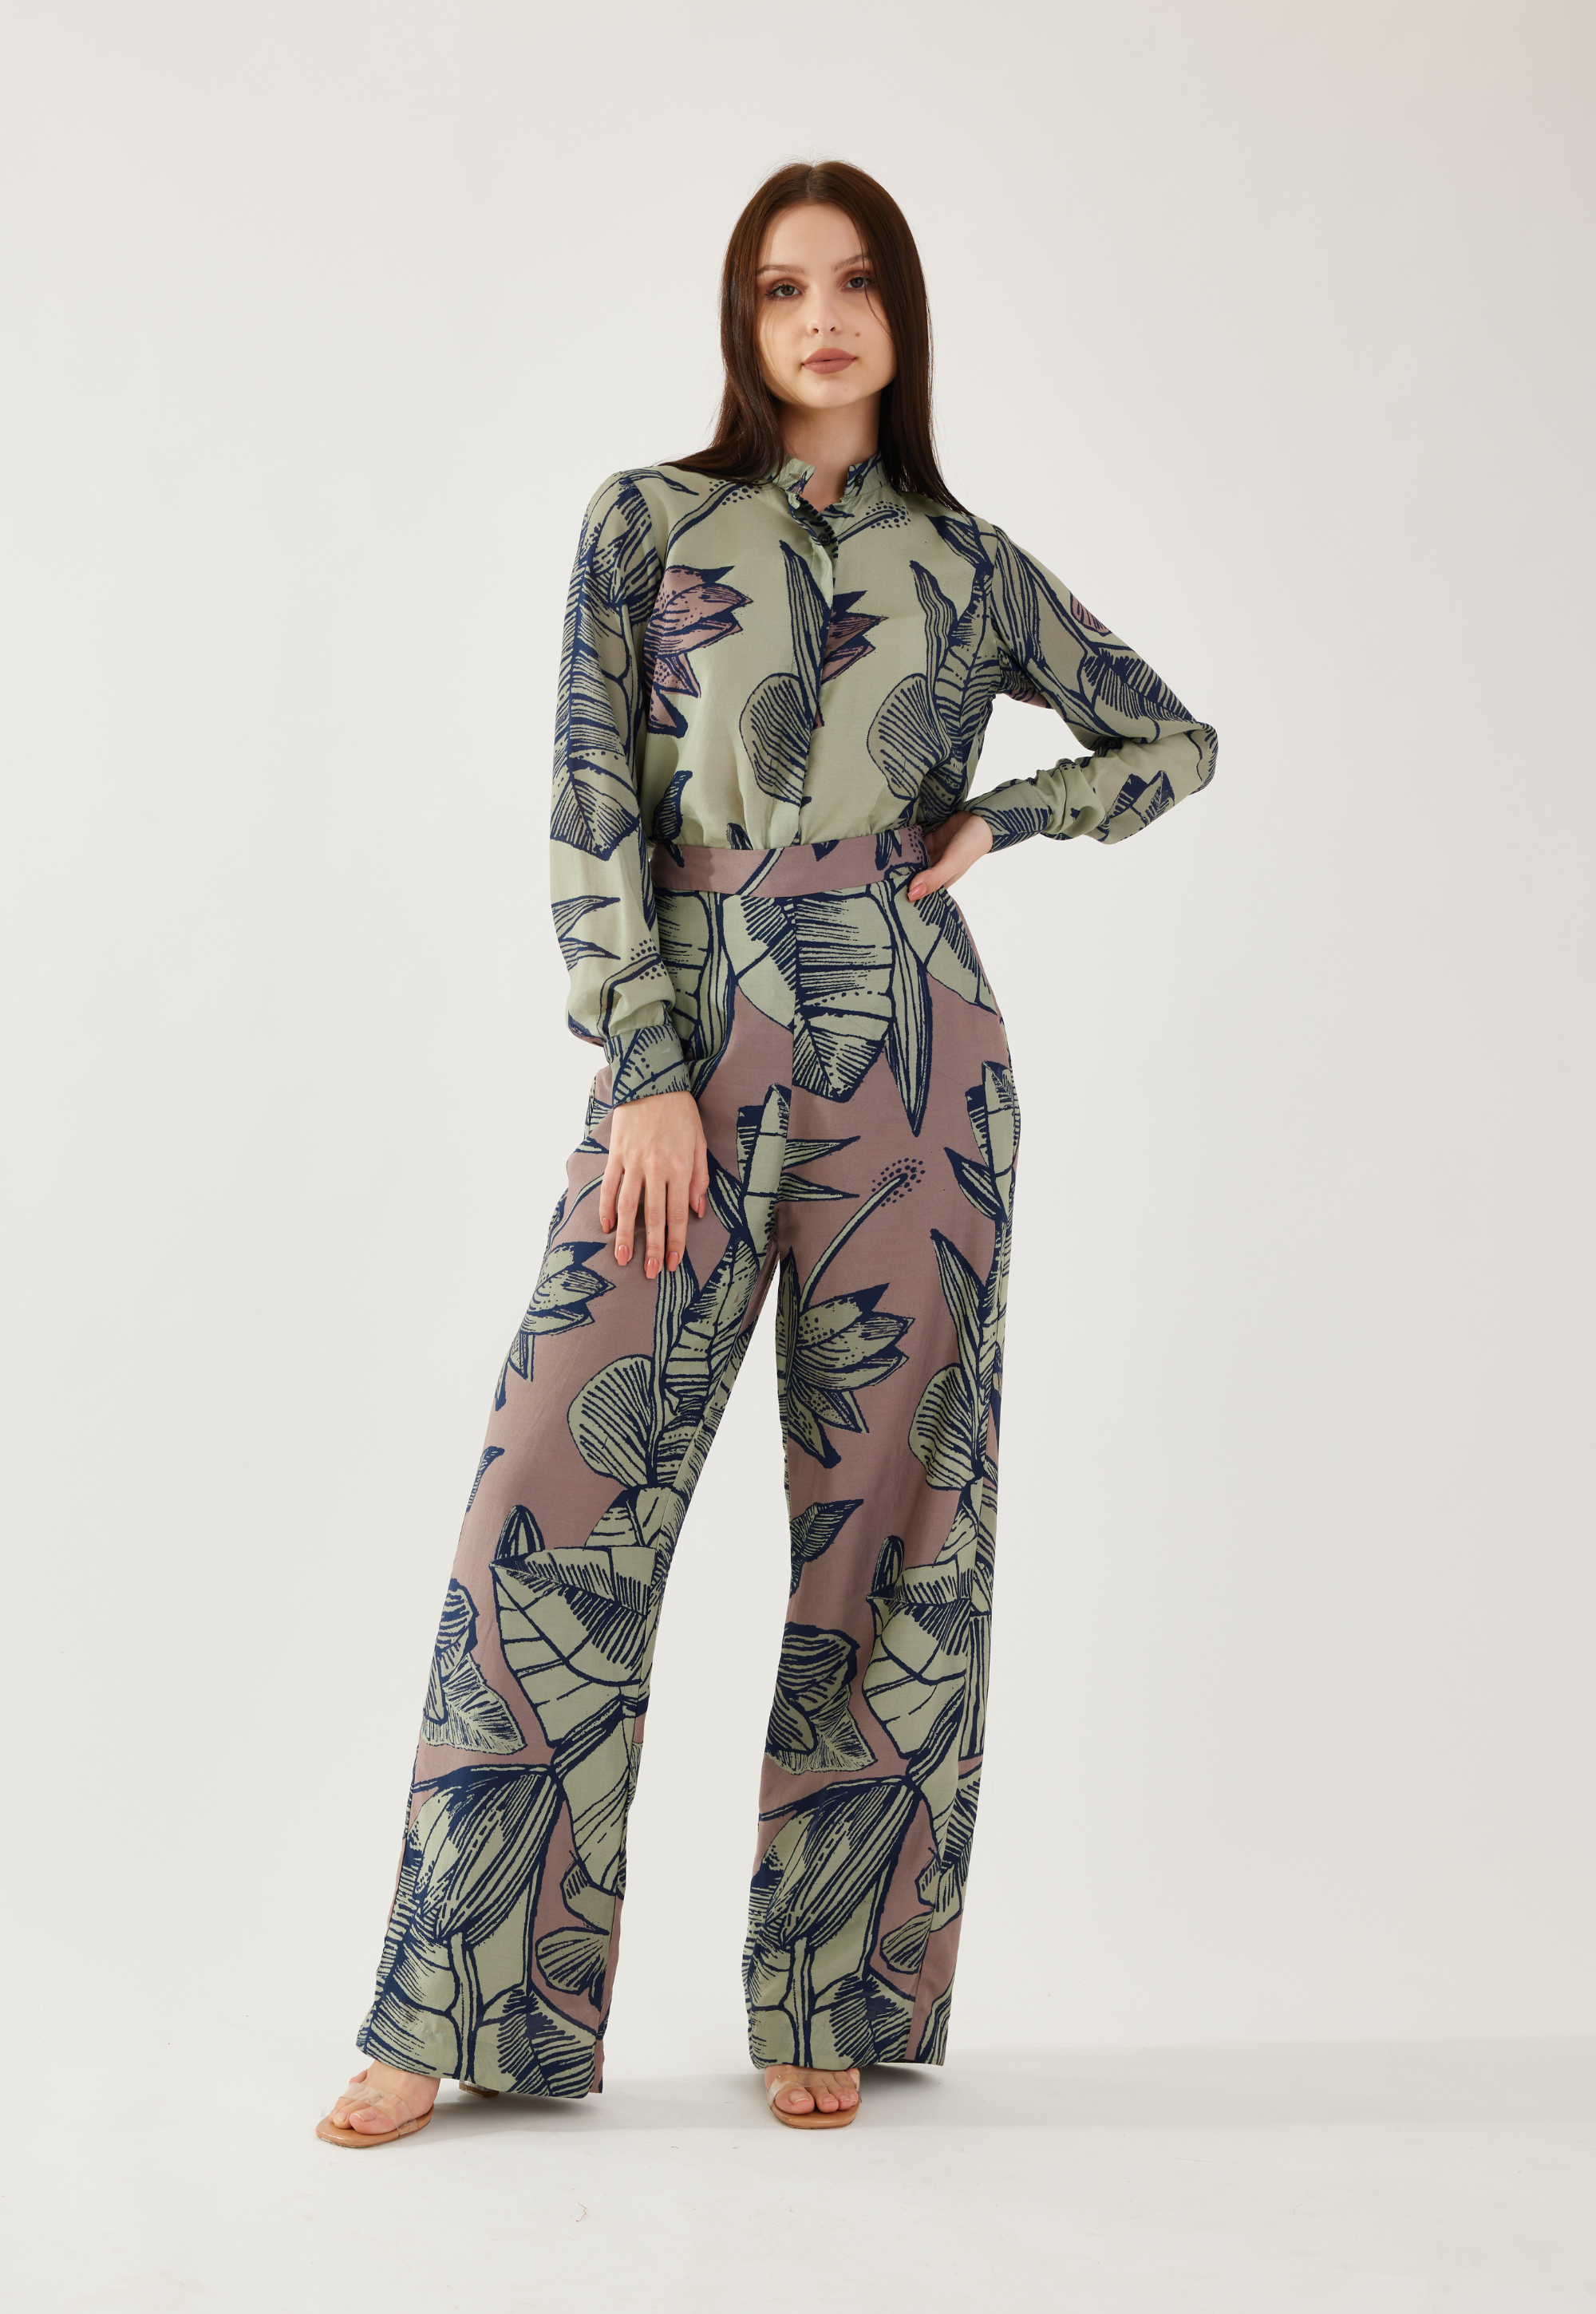 Olive and brown floral pants